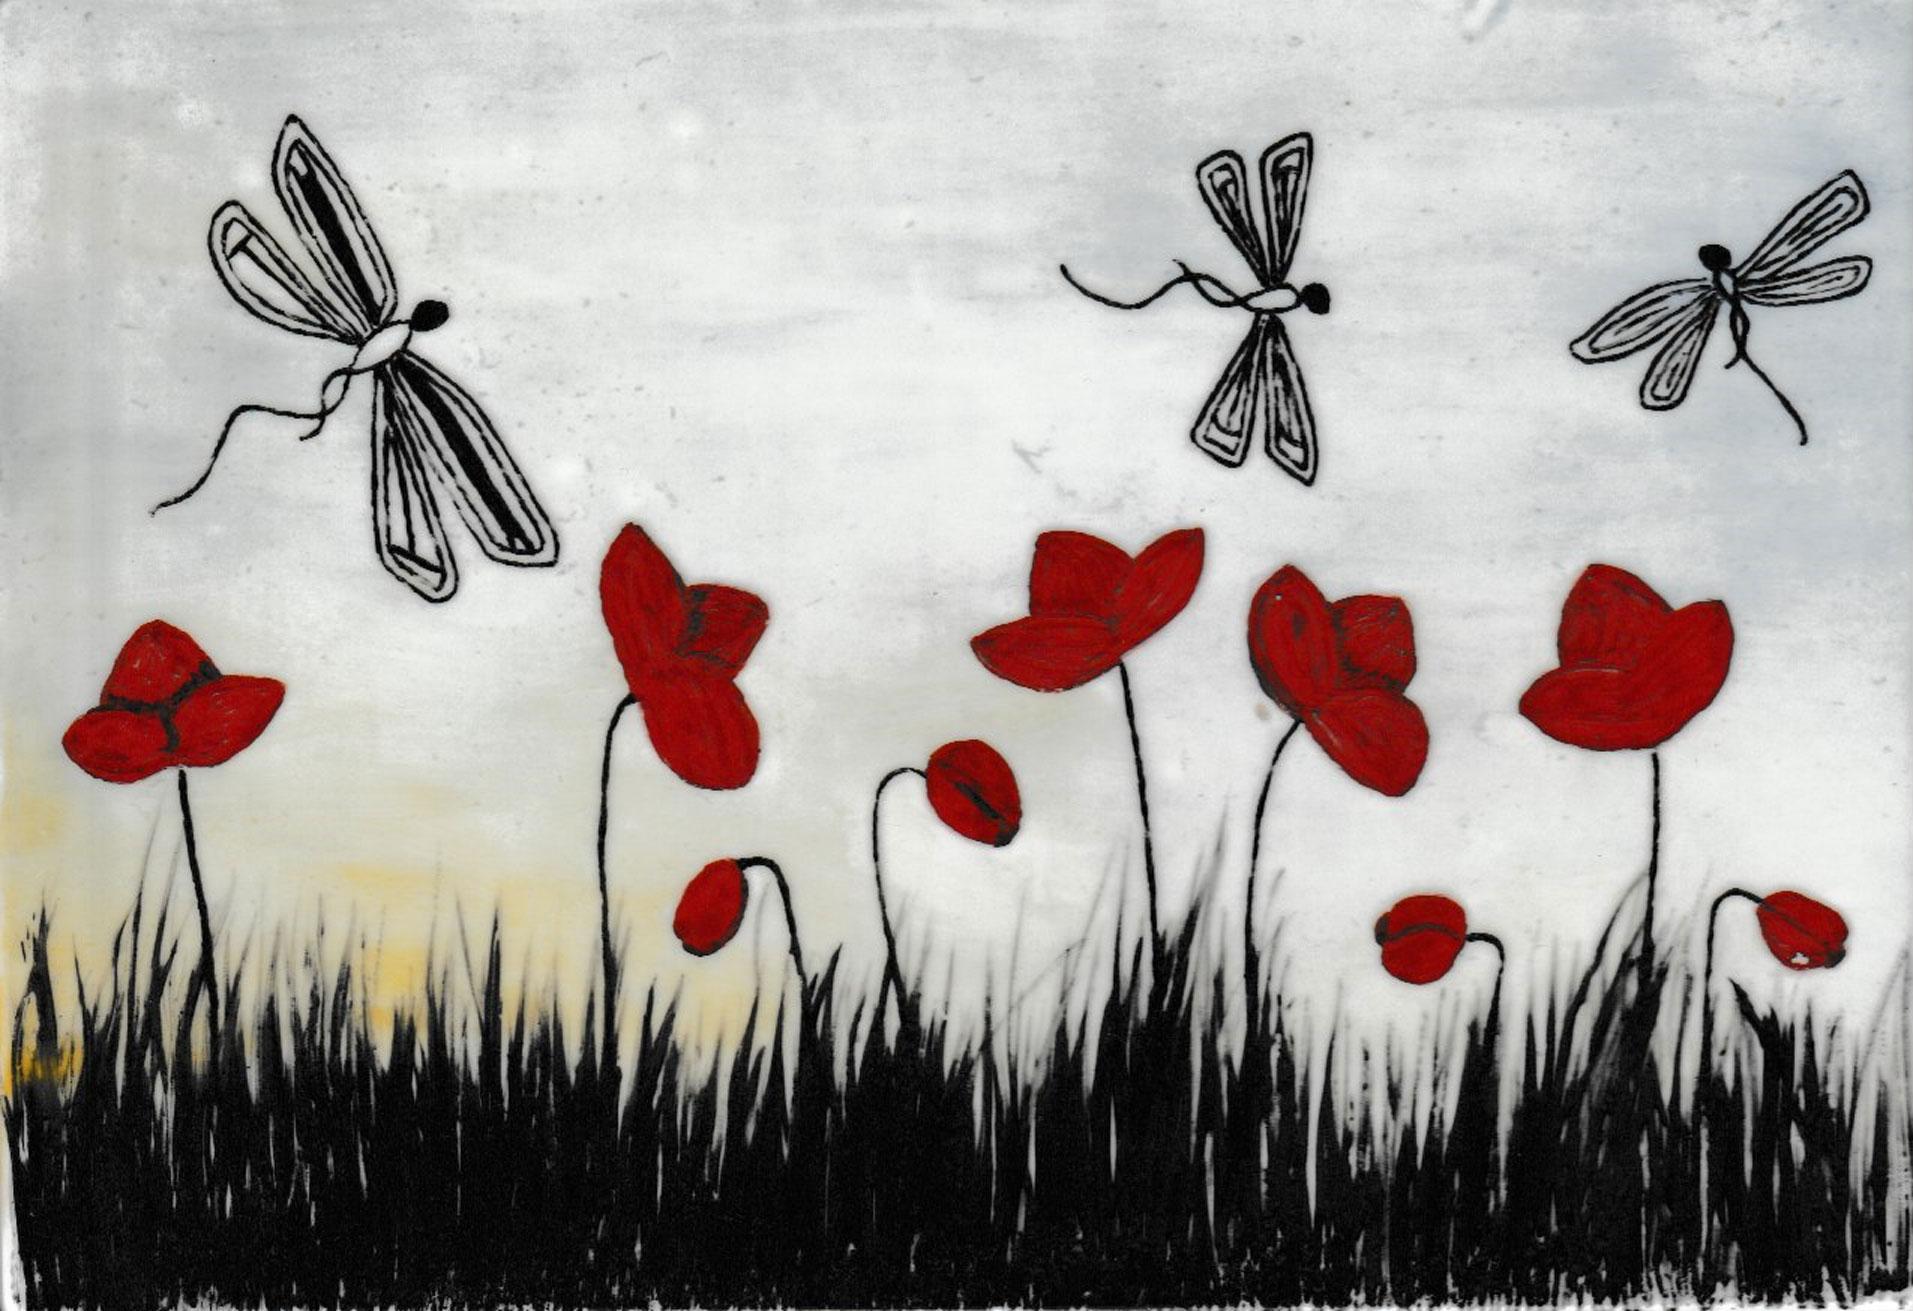 Drawing of three dragonflies flying above a field of red poppies